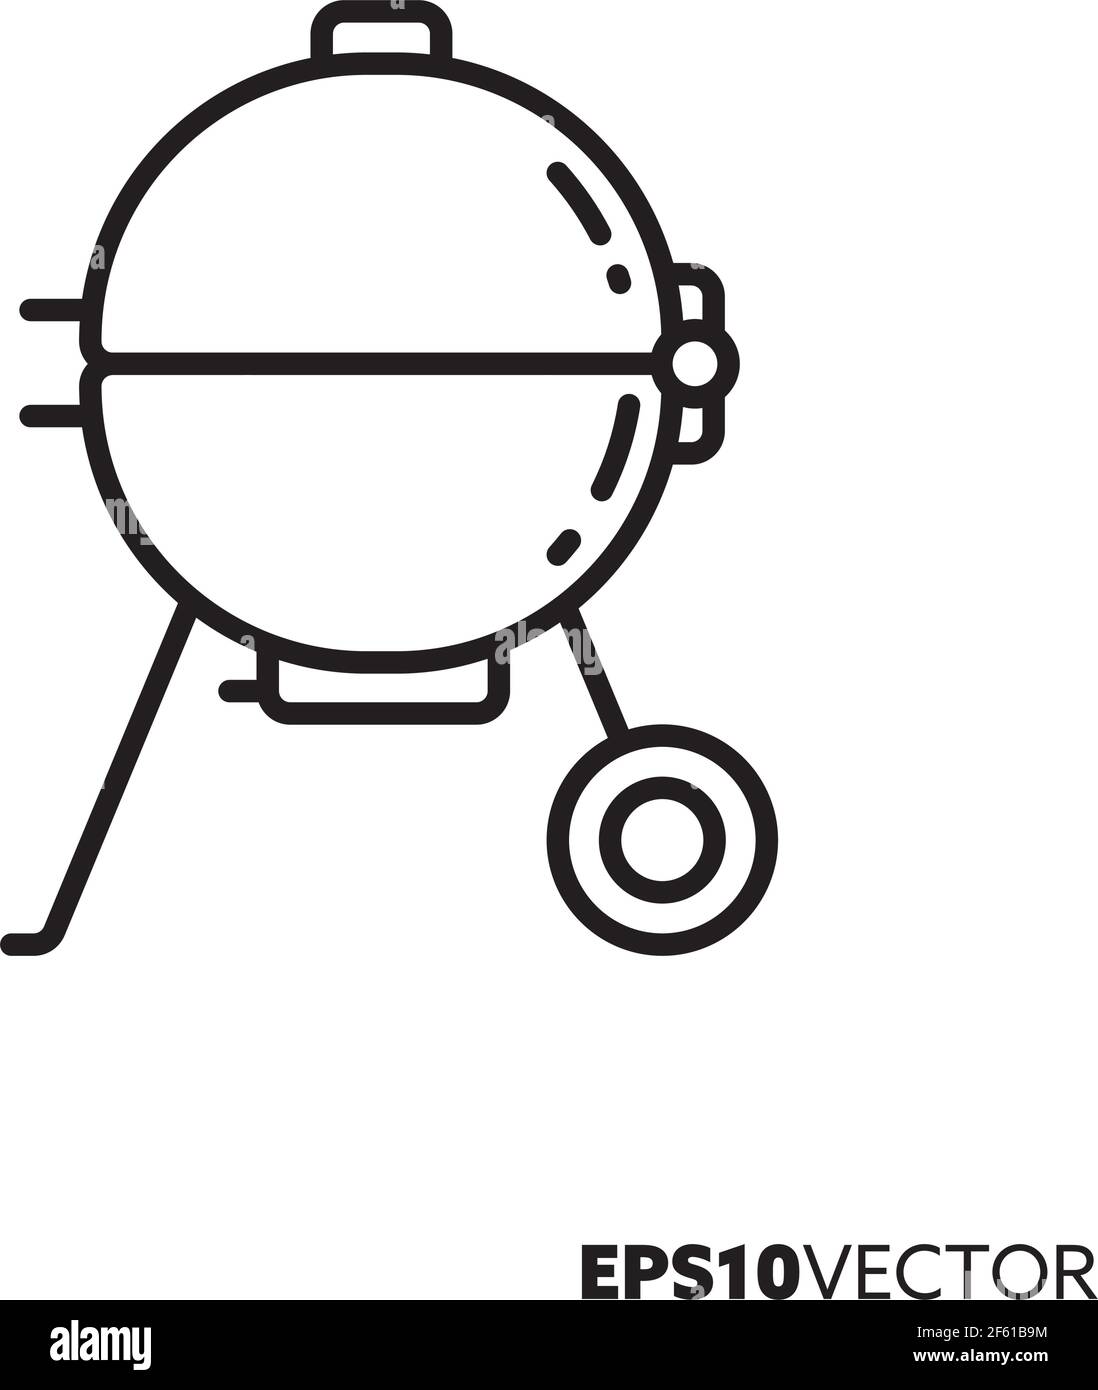 Barbecue Equipment - Pictogram Stock Vector - Illustration of